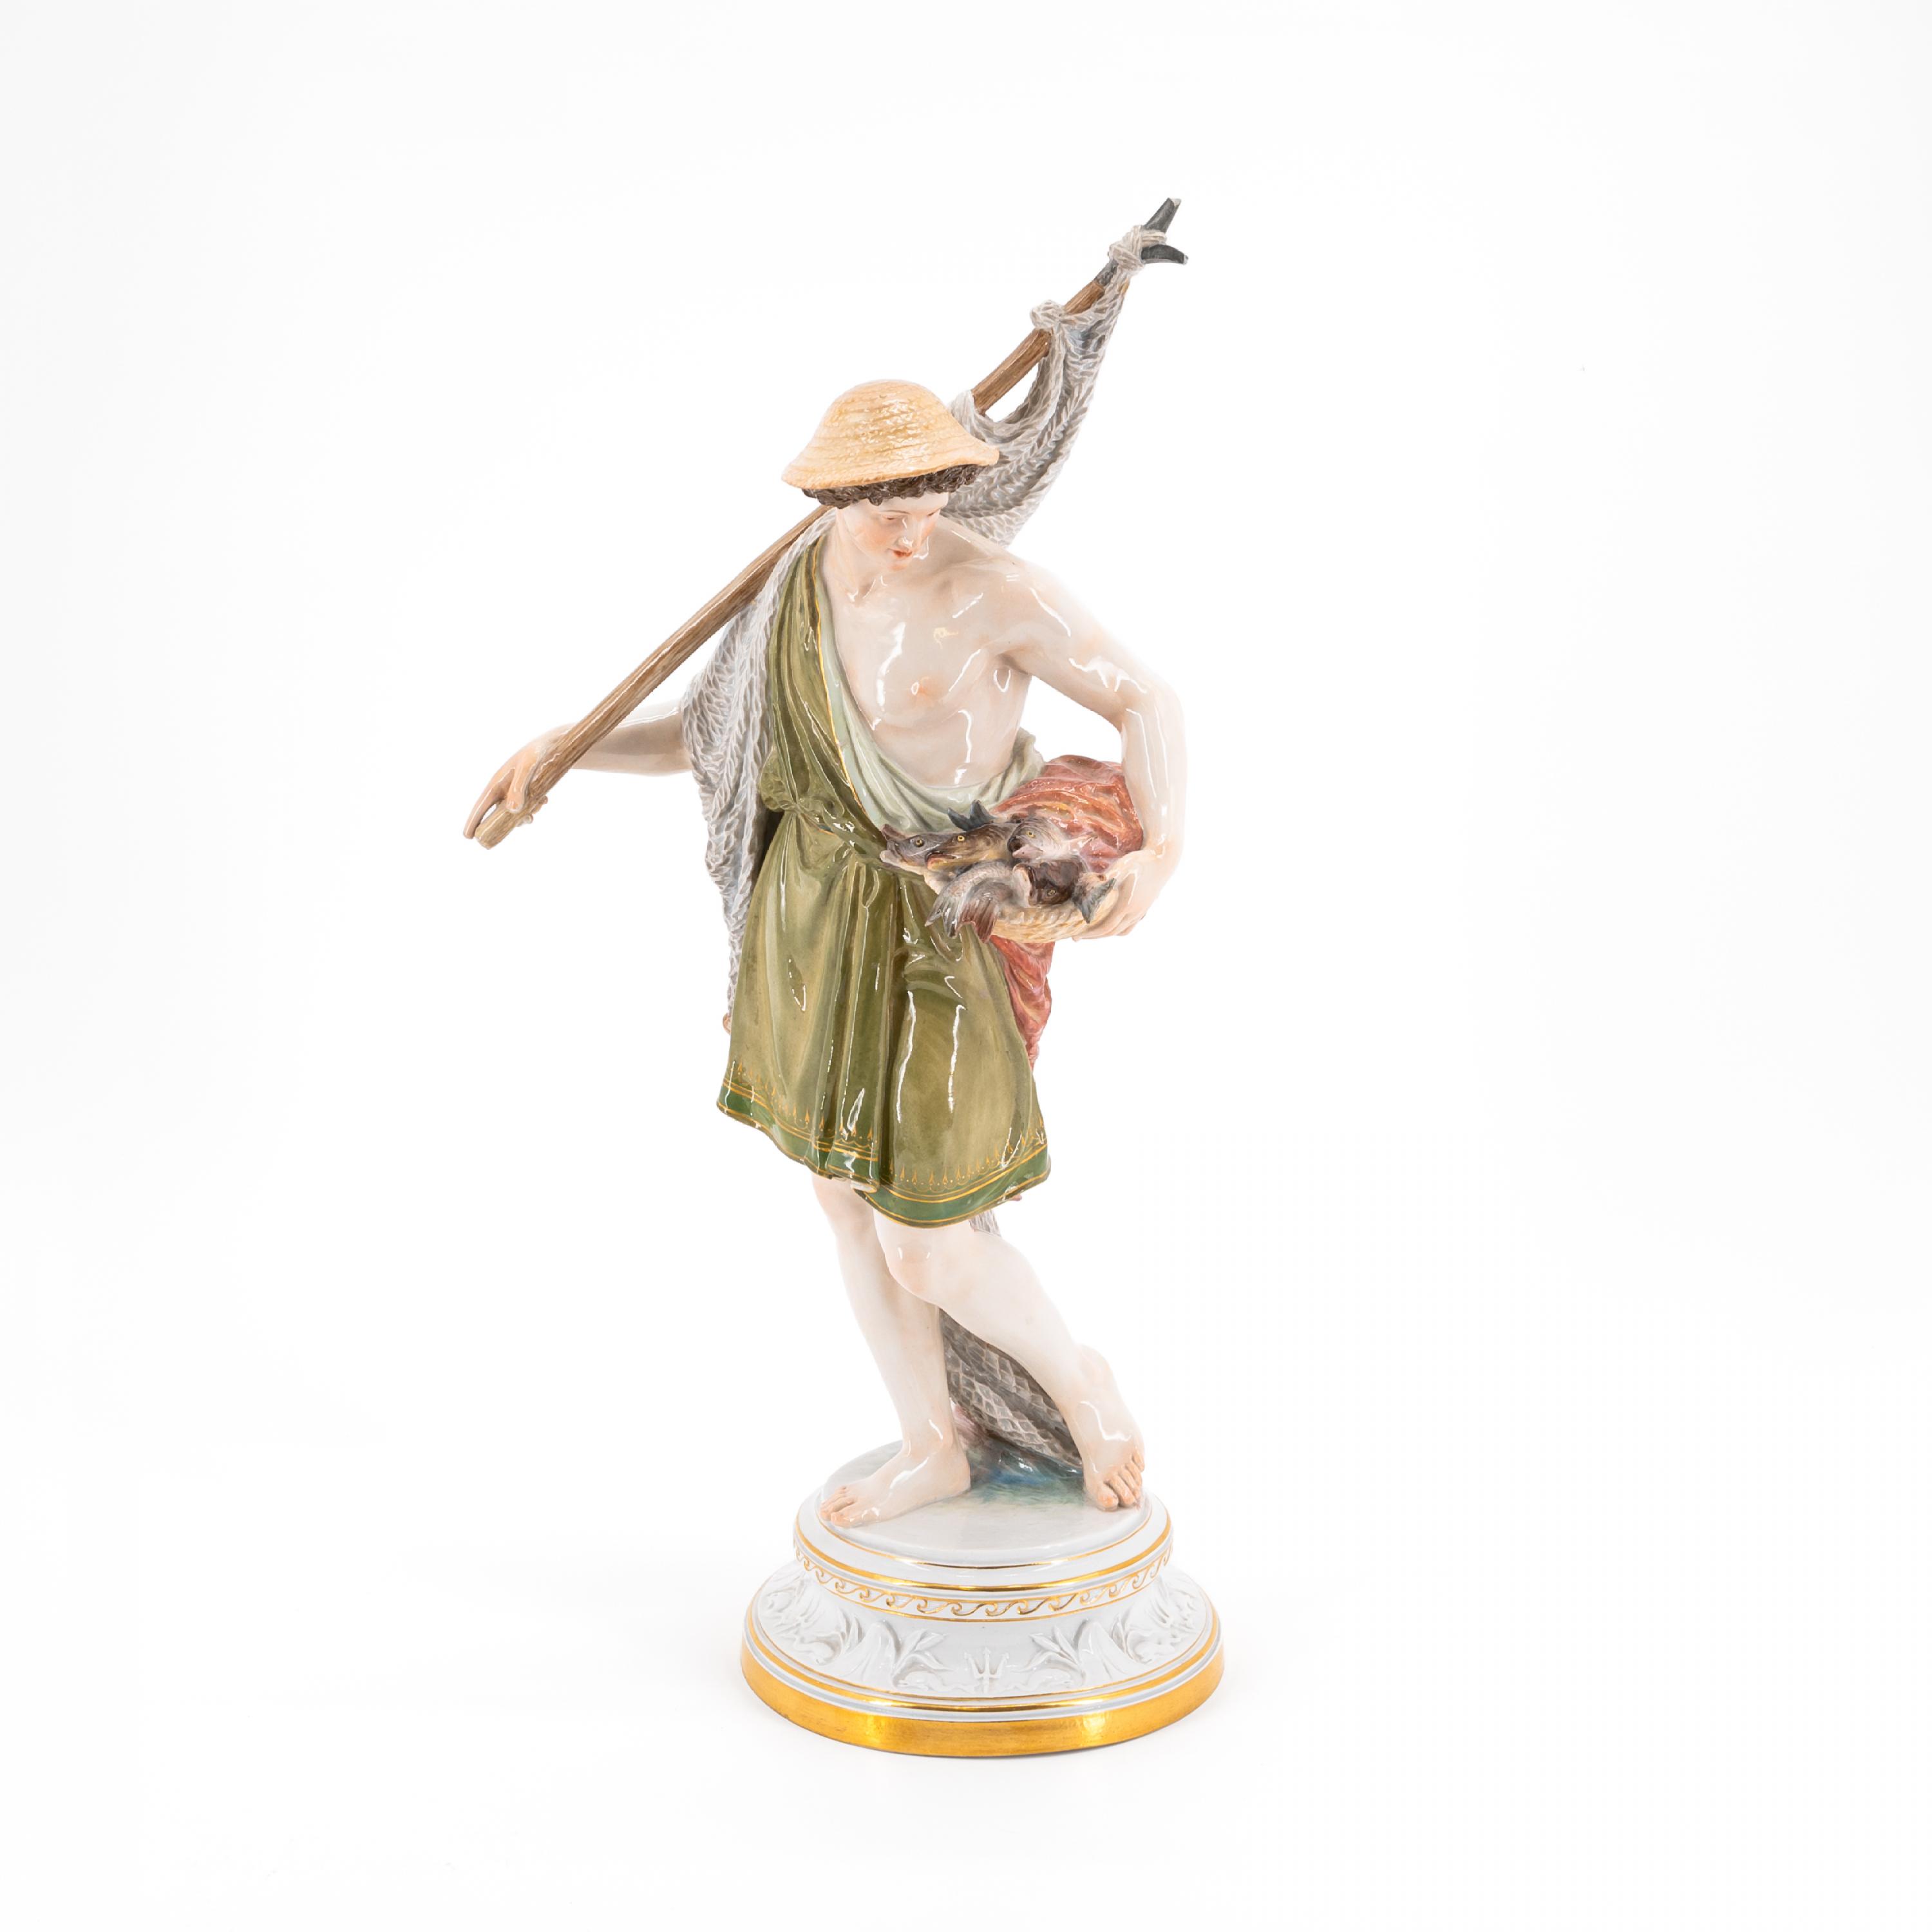 LARGE PORCELAIN FIGURINE OF A FISHER - Image 2 of 6